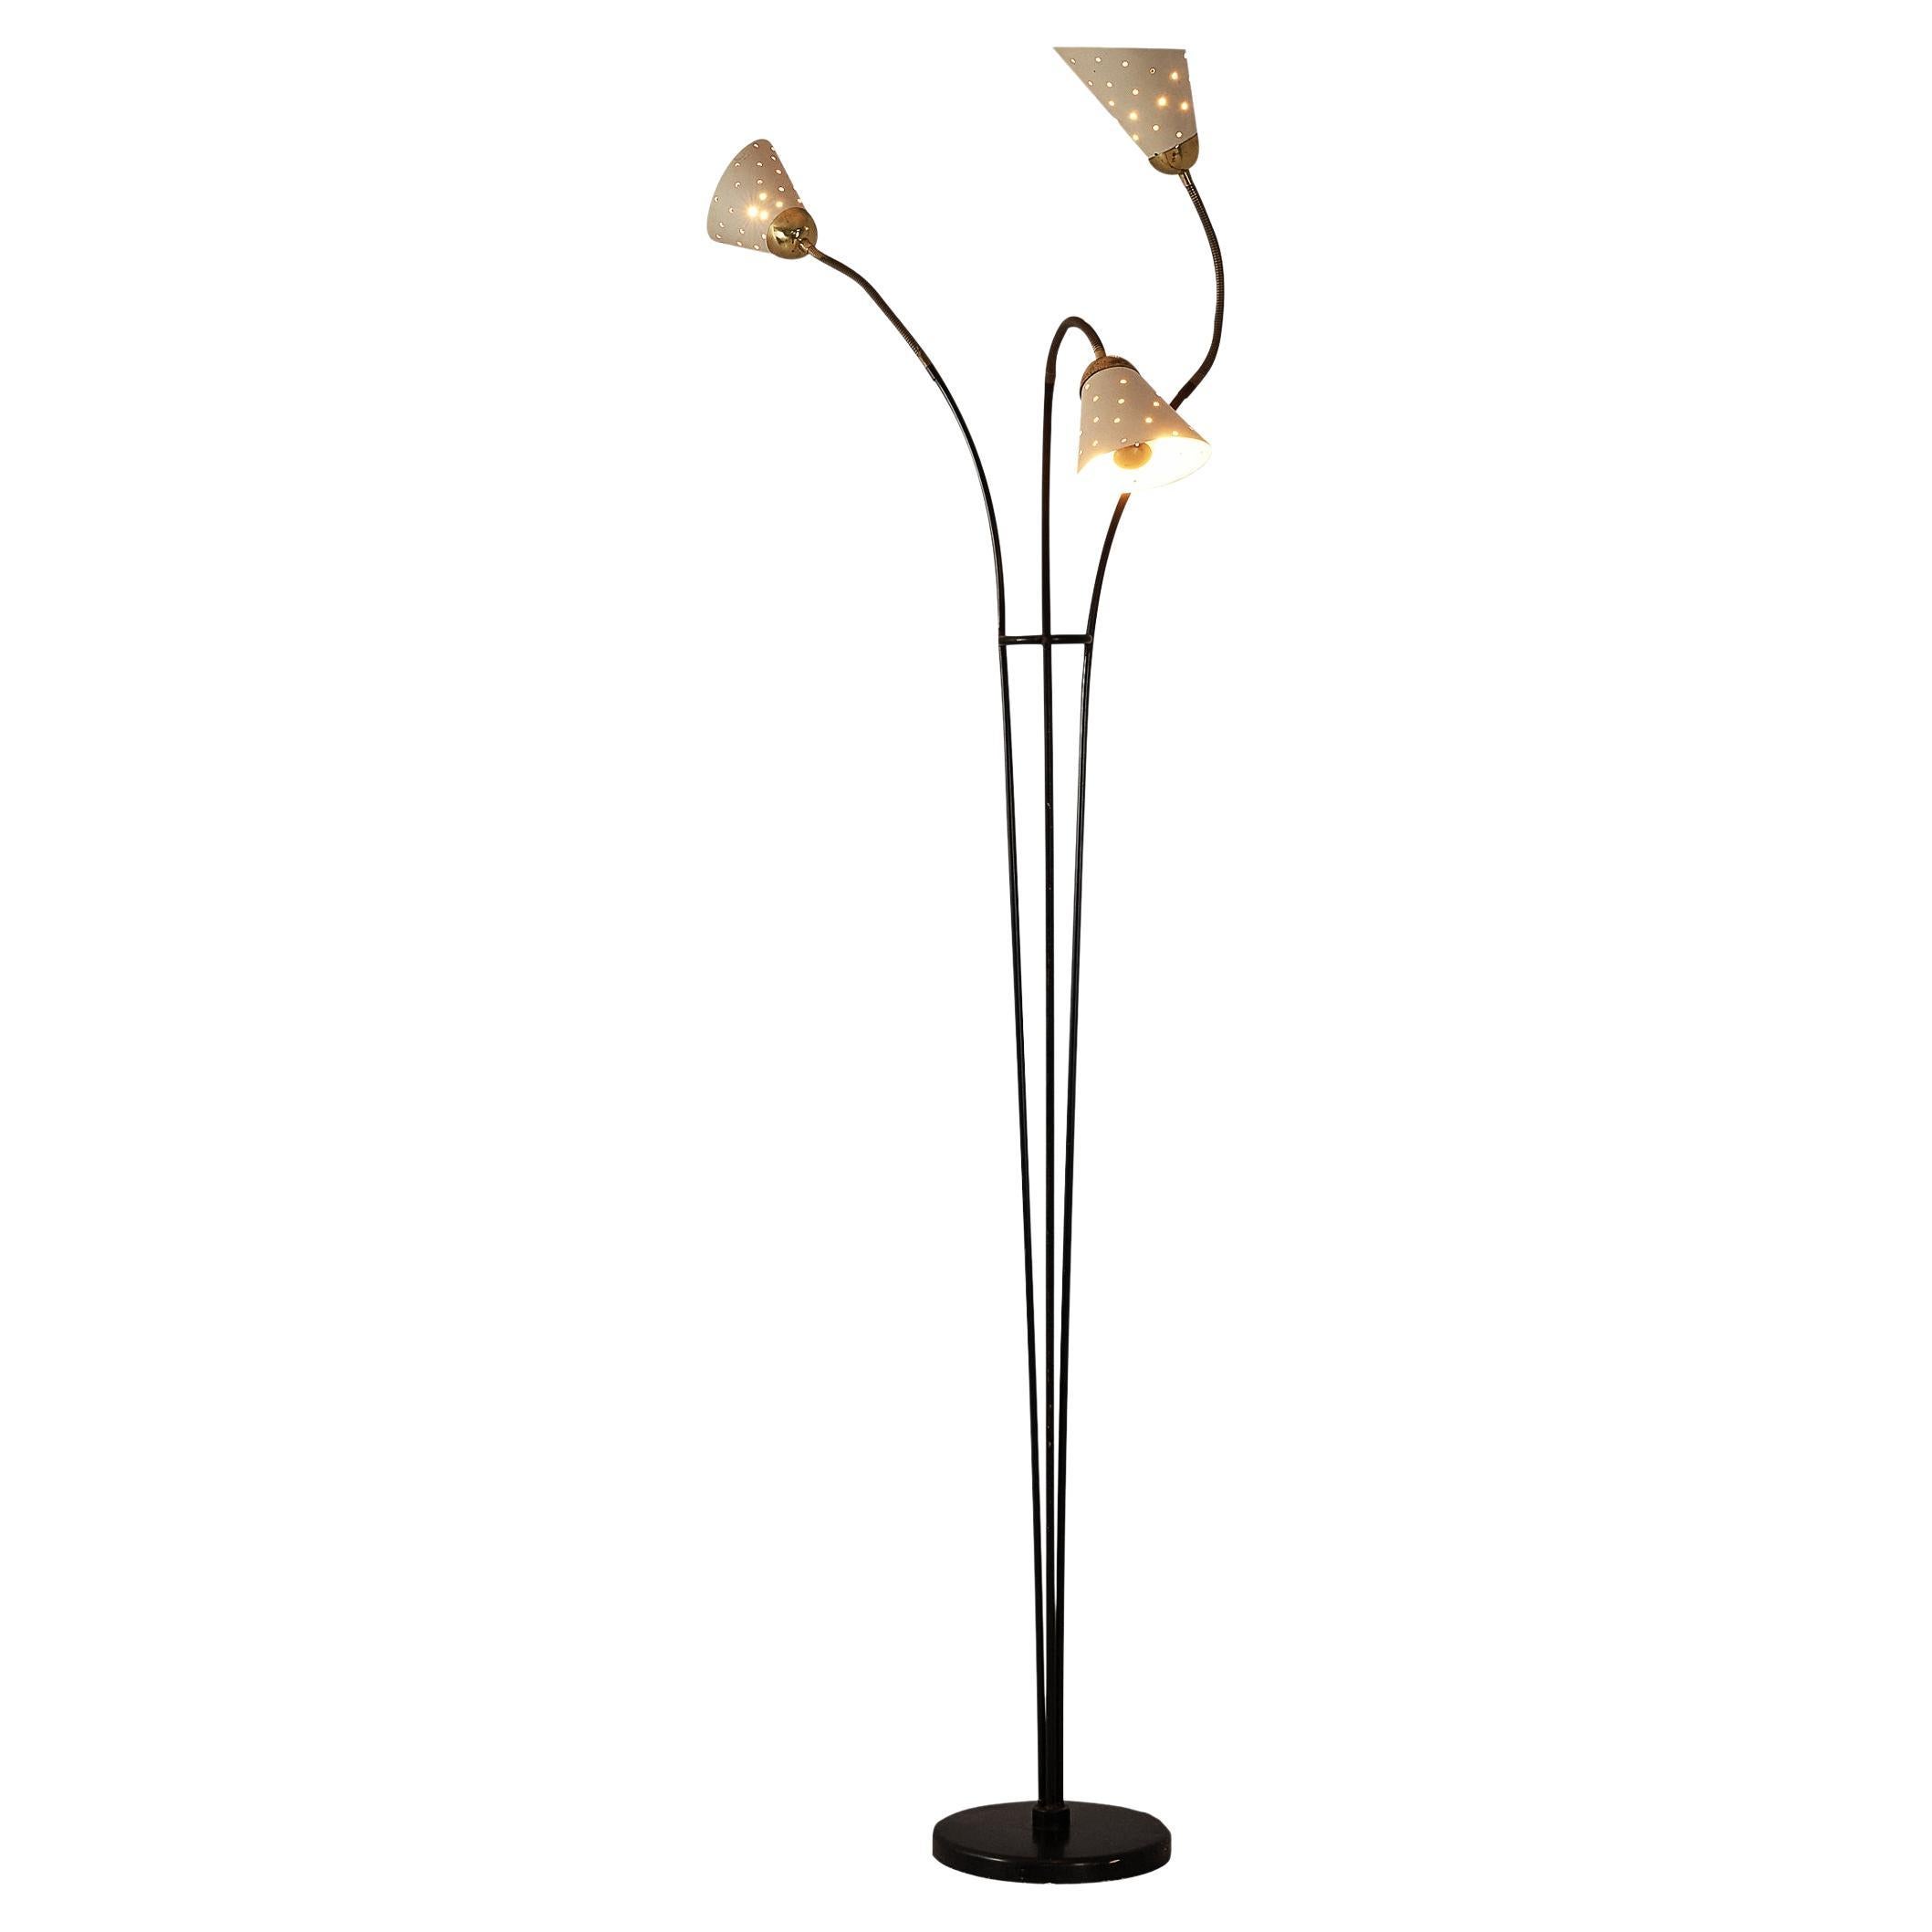 Mid-Century Modern Three-Armed Floor Lamp in Brass with Perforated Shades